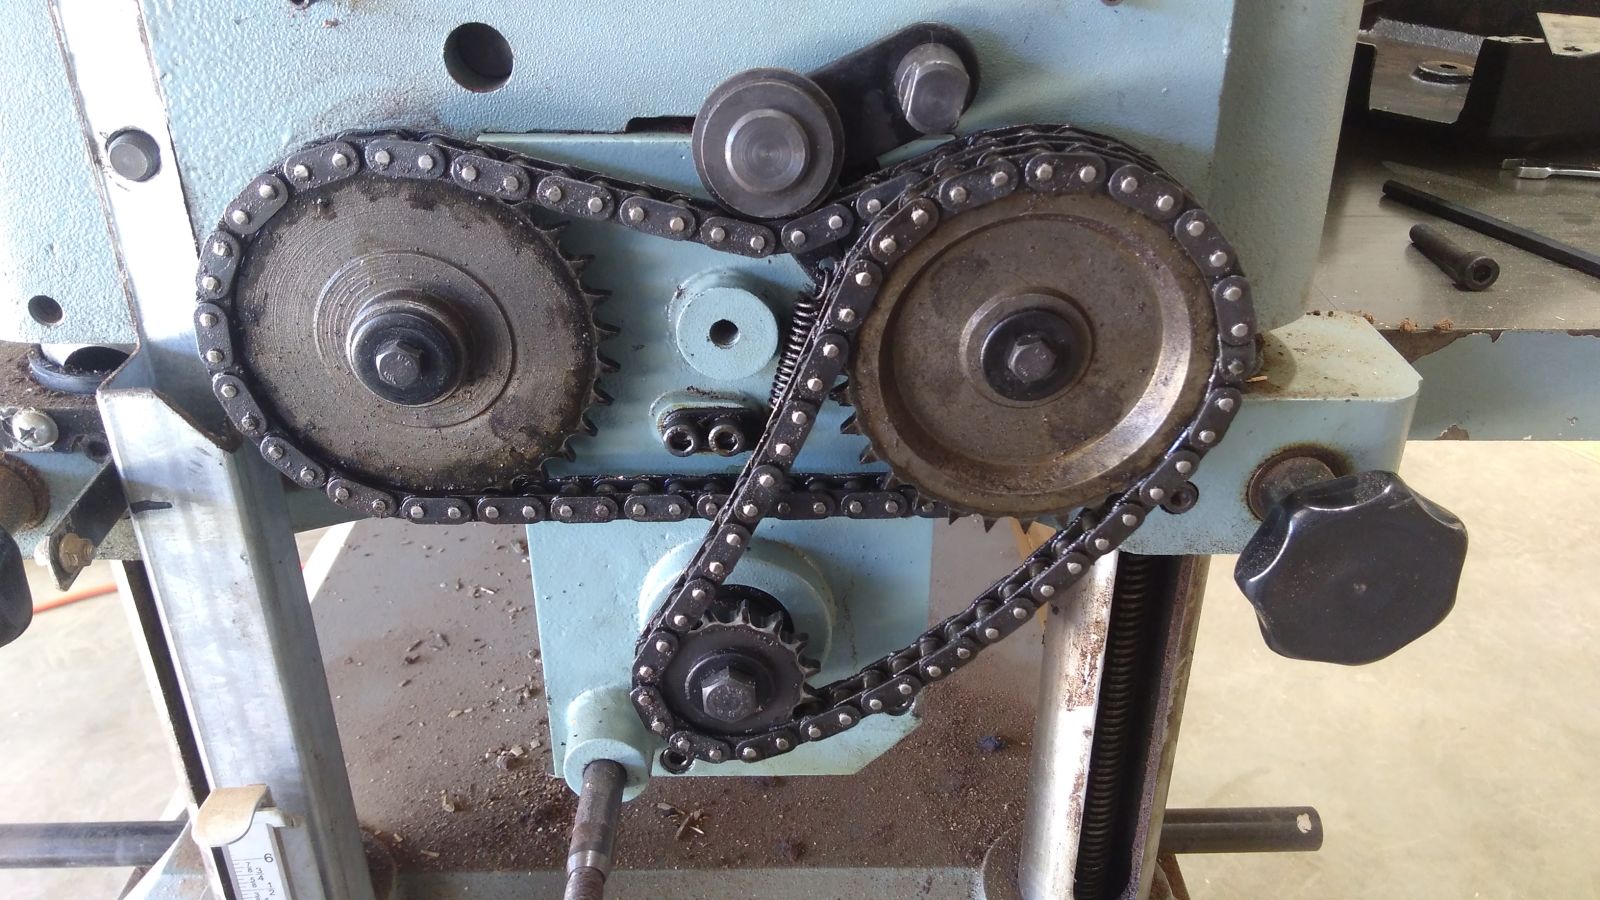 The gearbox is behind those sprockets. It directs the drive off the motor via the cutter bar to both the in and out feed rollers behind the bigger sprockets. The rod at the bottom left corner is the gearstick.